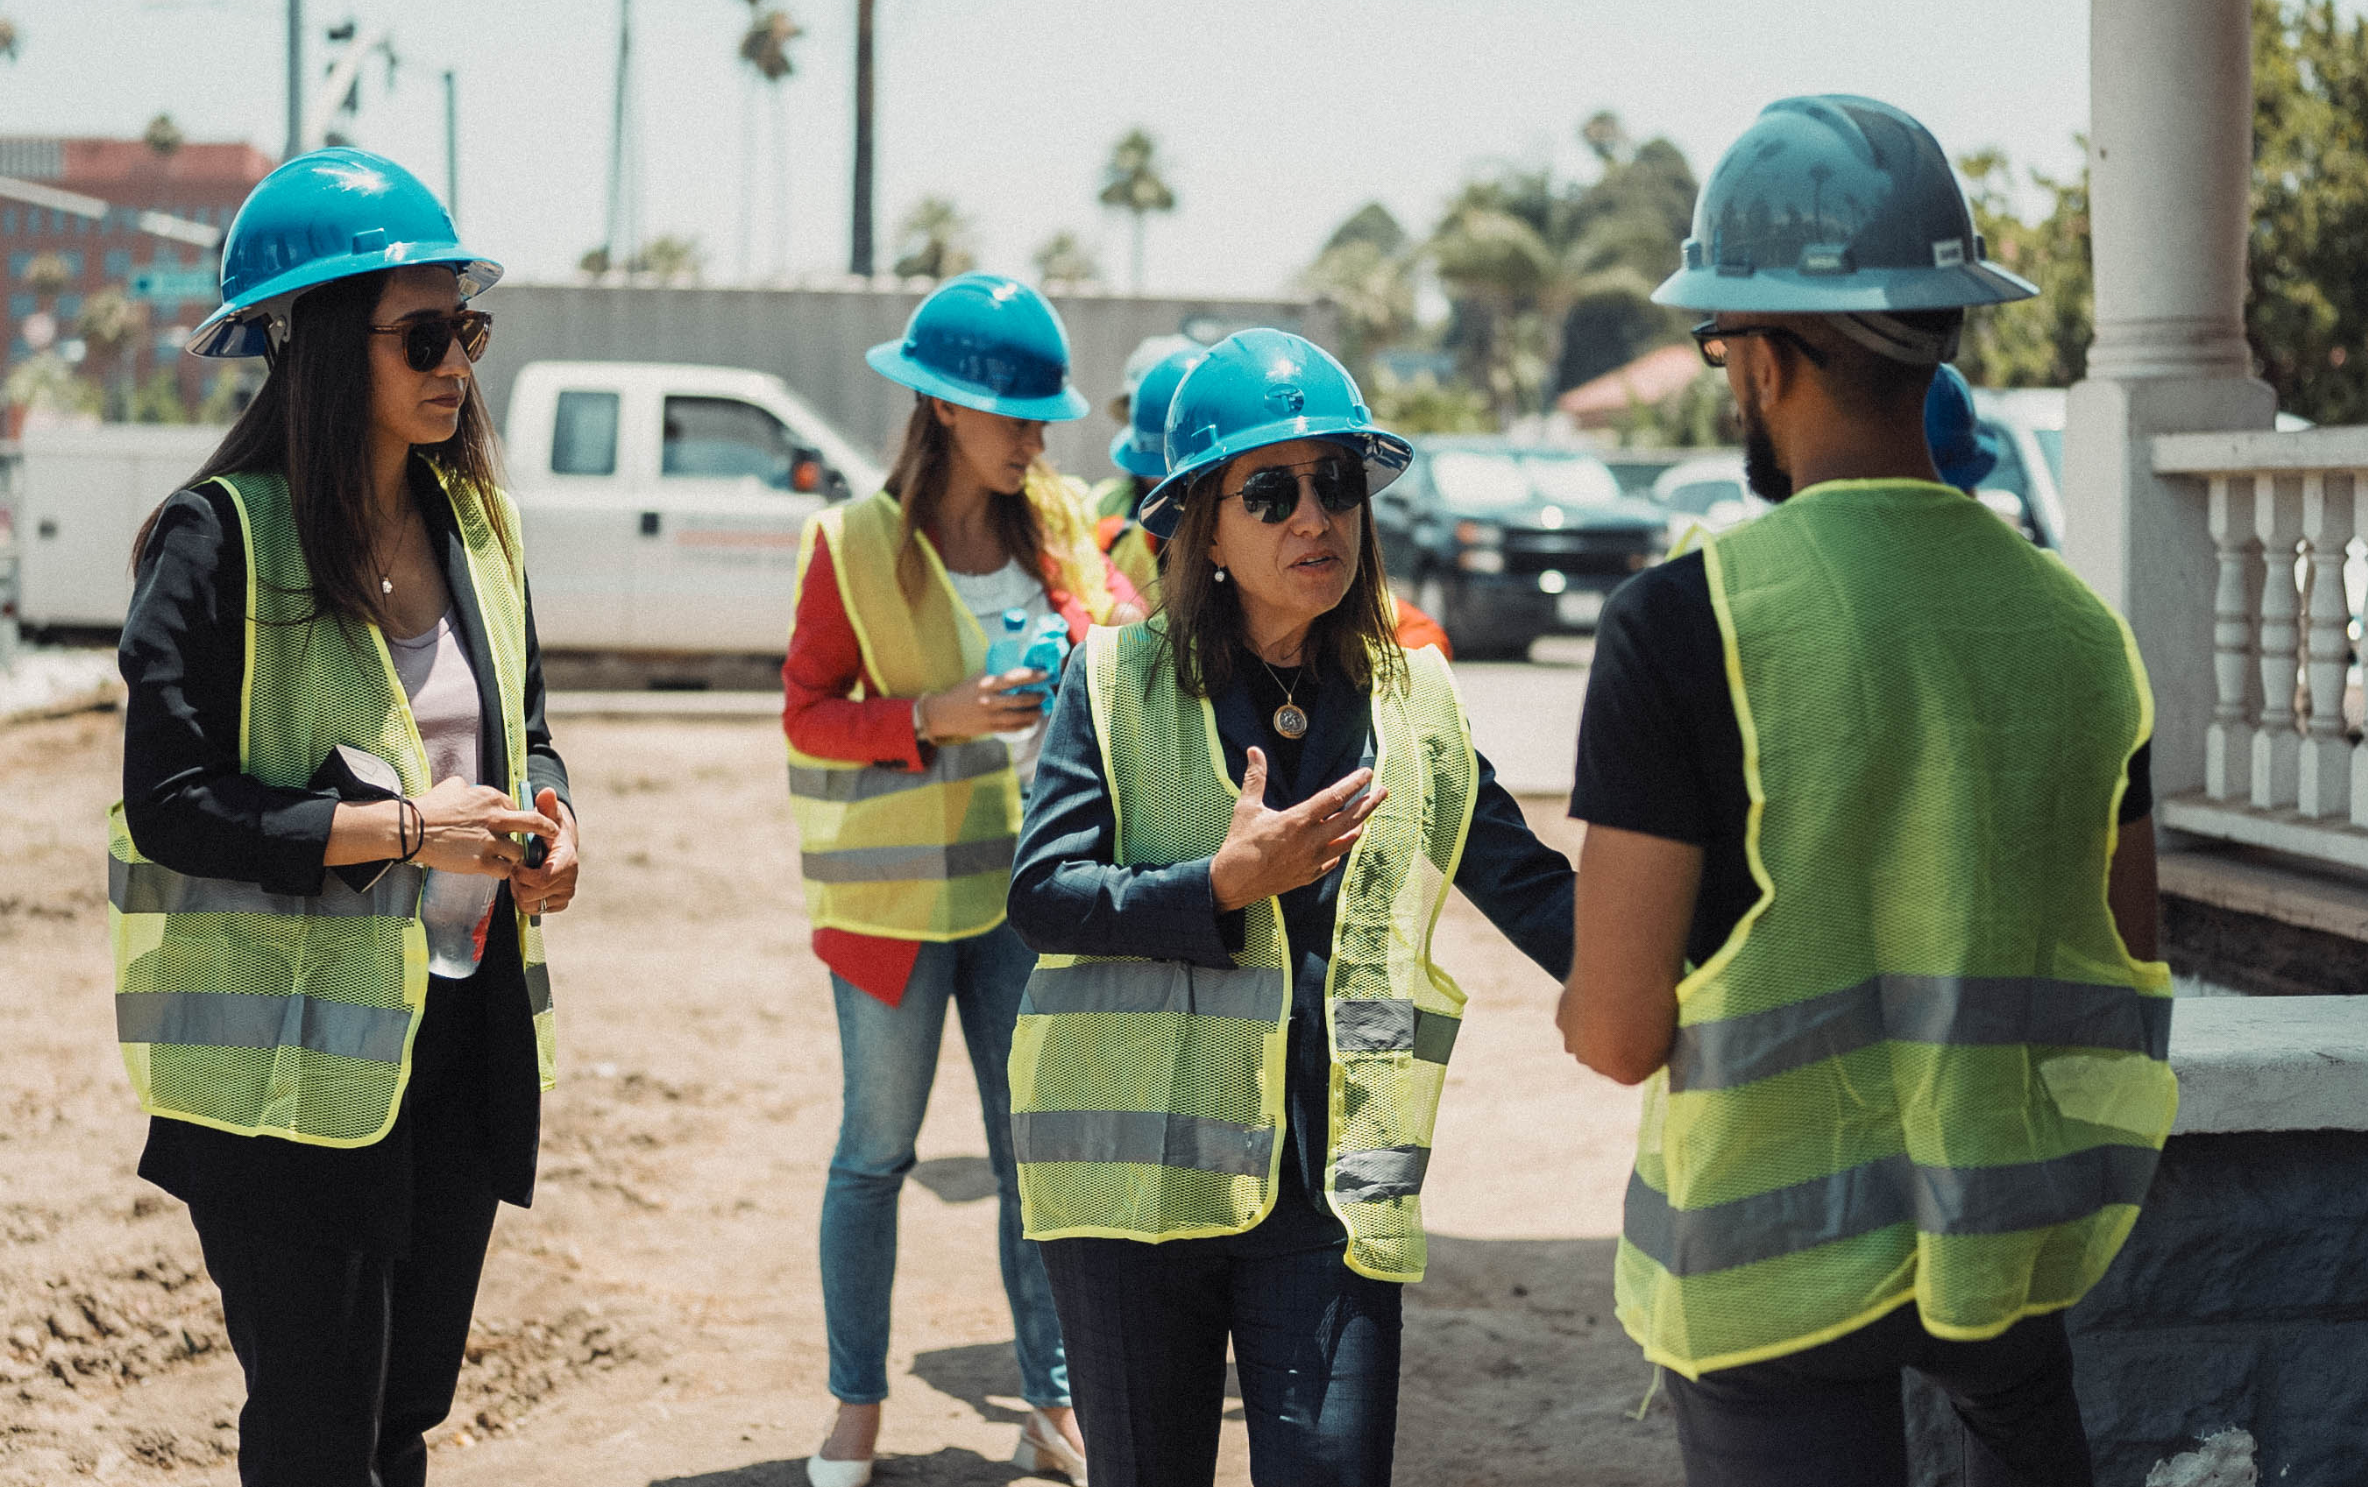 Image of Lt. Governor Kounalakis touring a construction site